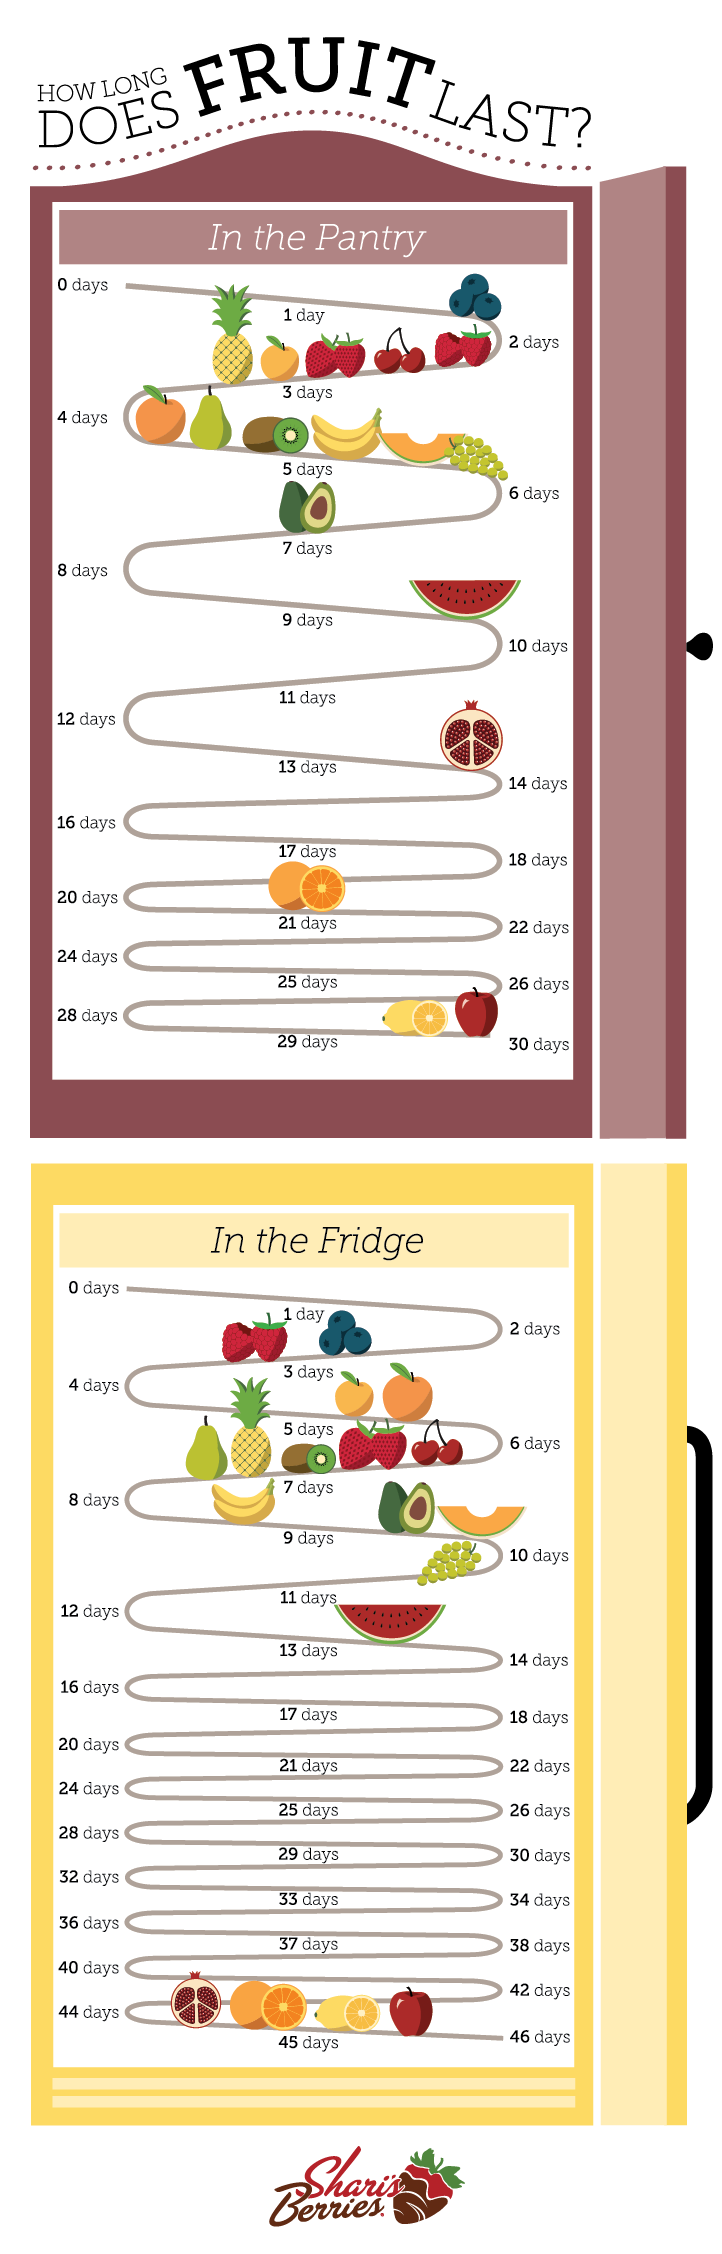 How Long Does Fruit Last